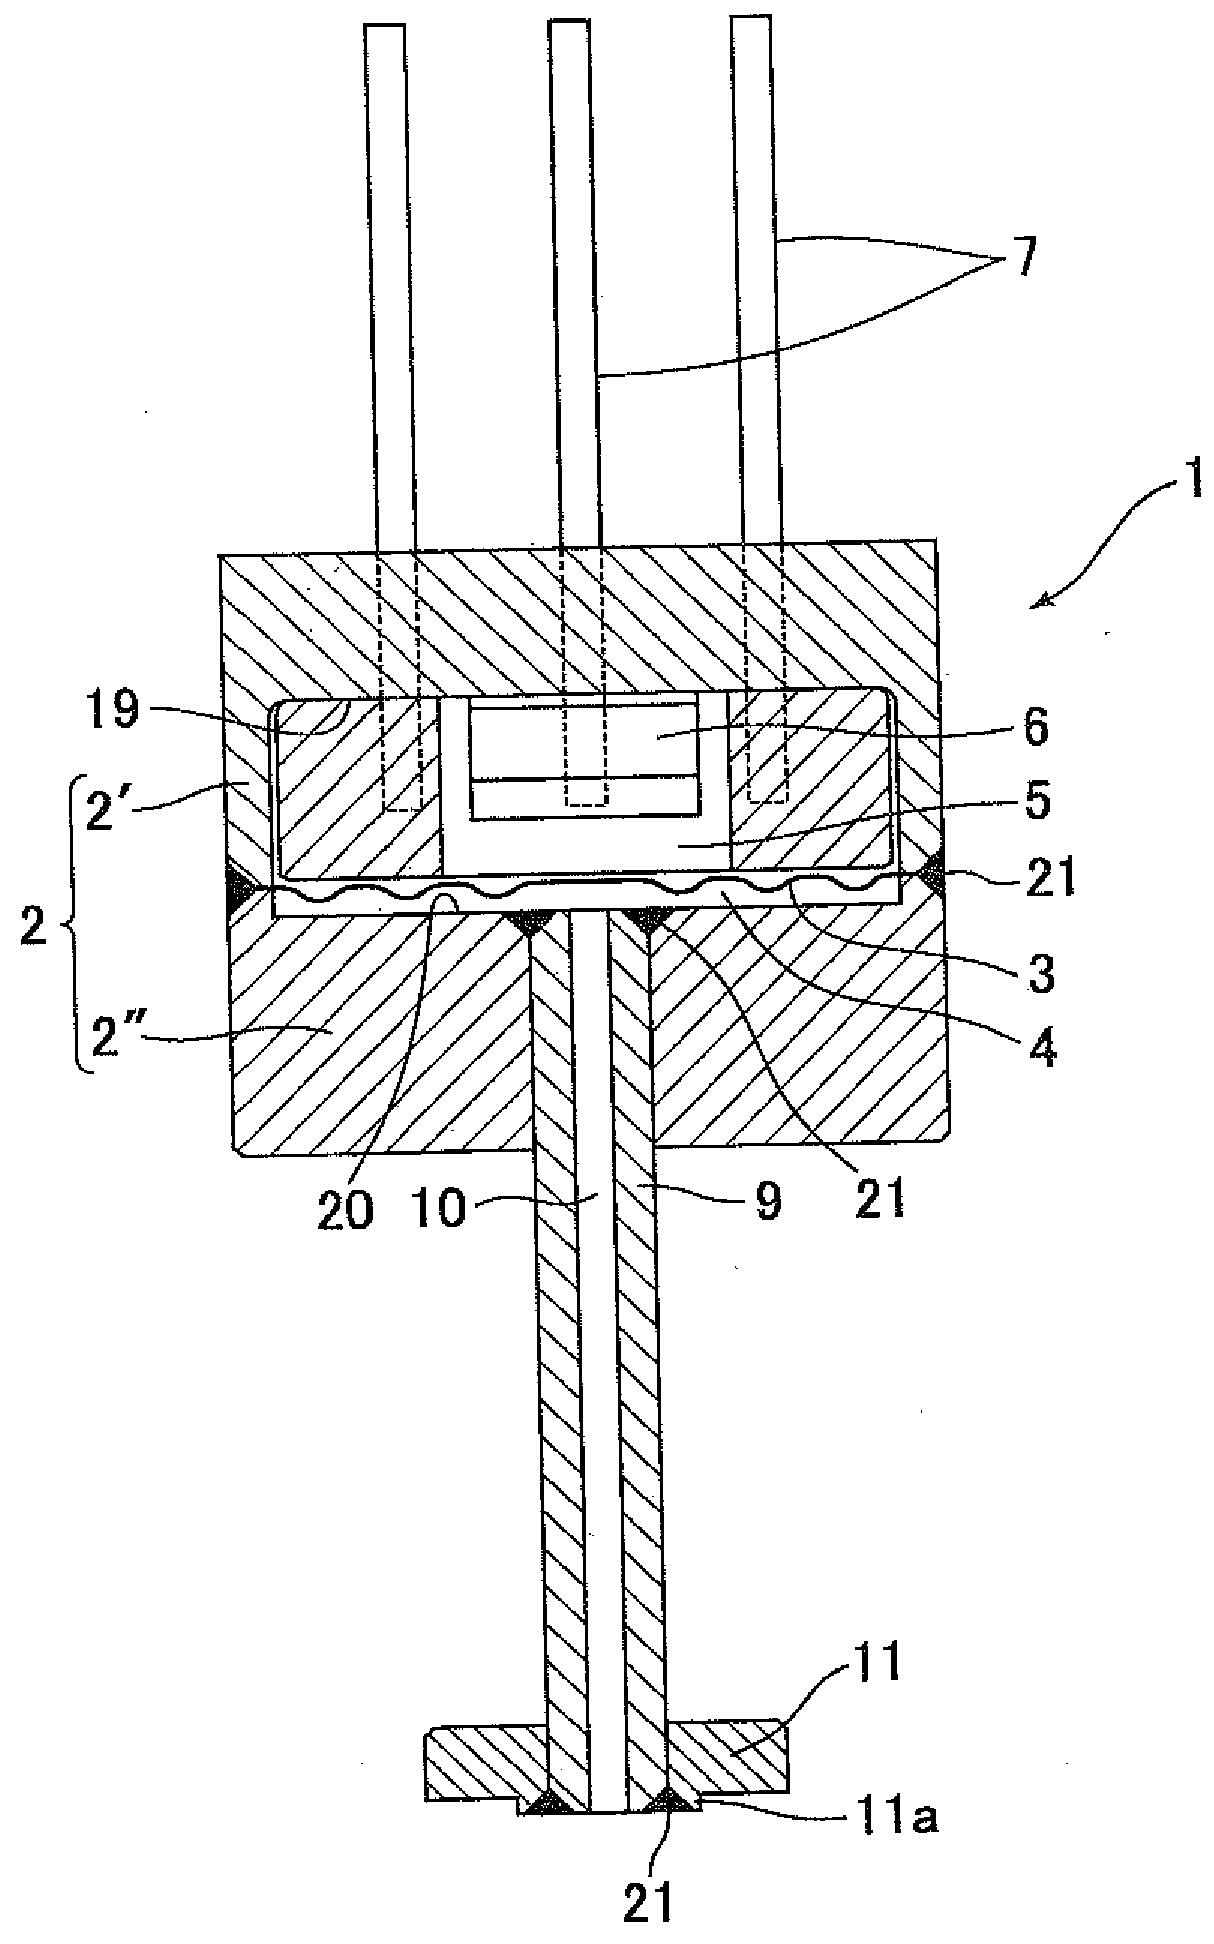 Structure for attaching pressure detector